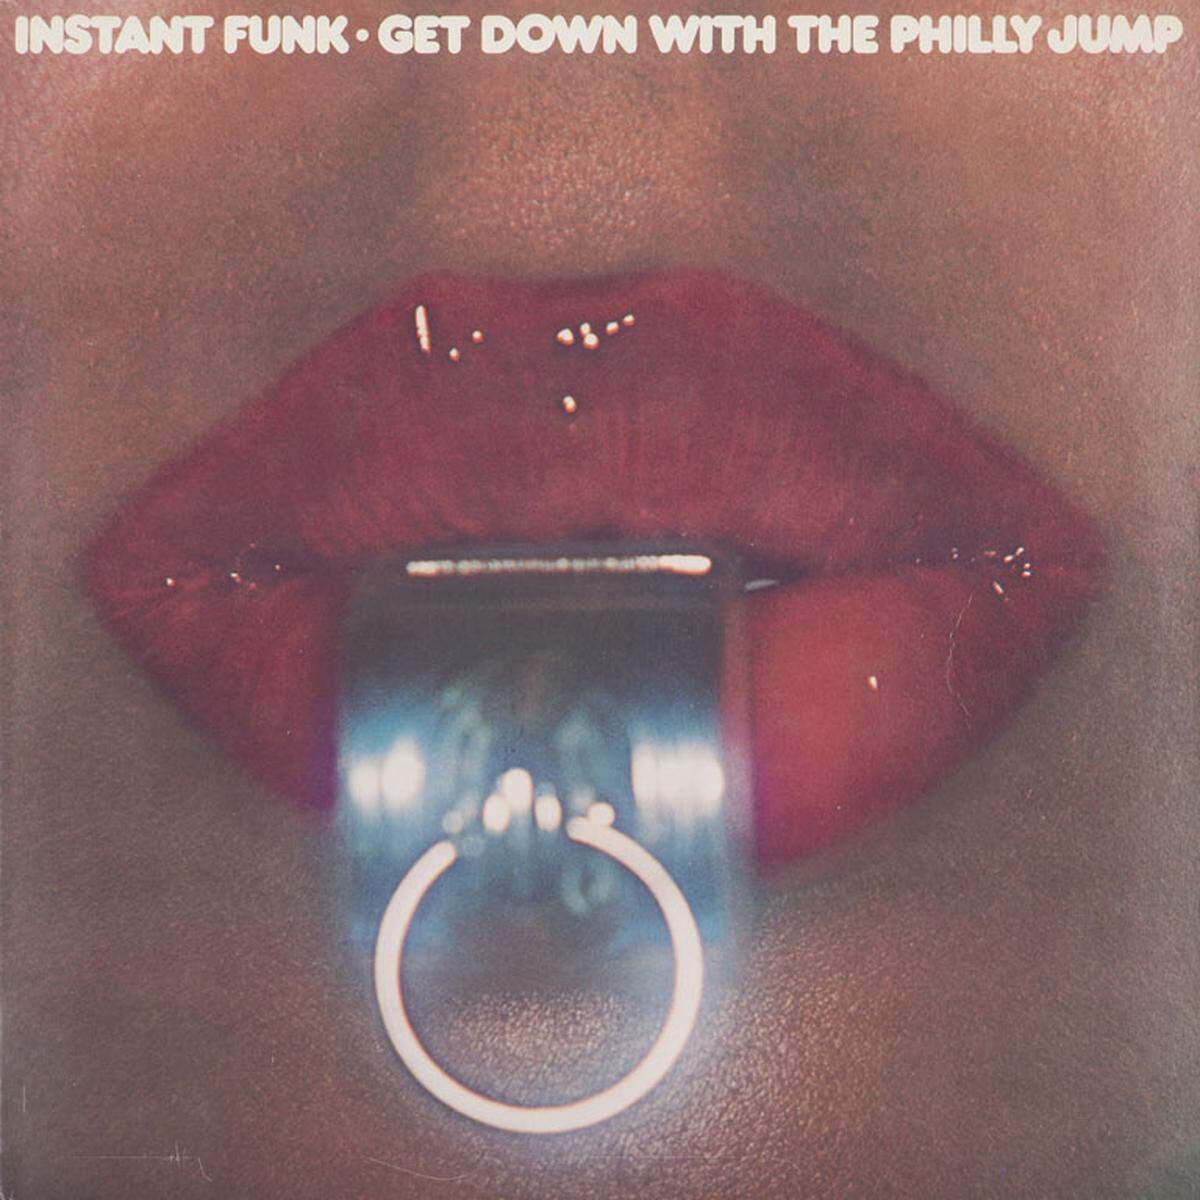 Instant Funk: "Get Down With The Philly Jump" (TSOP, 1976)